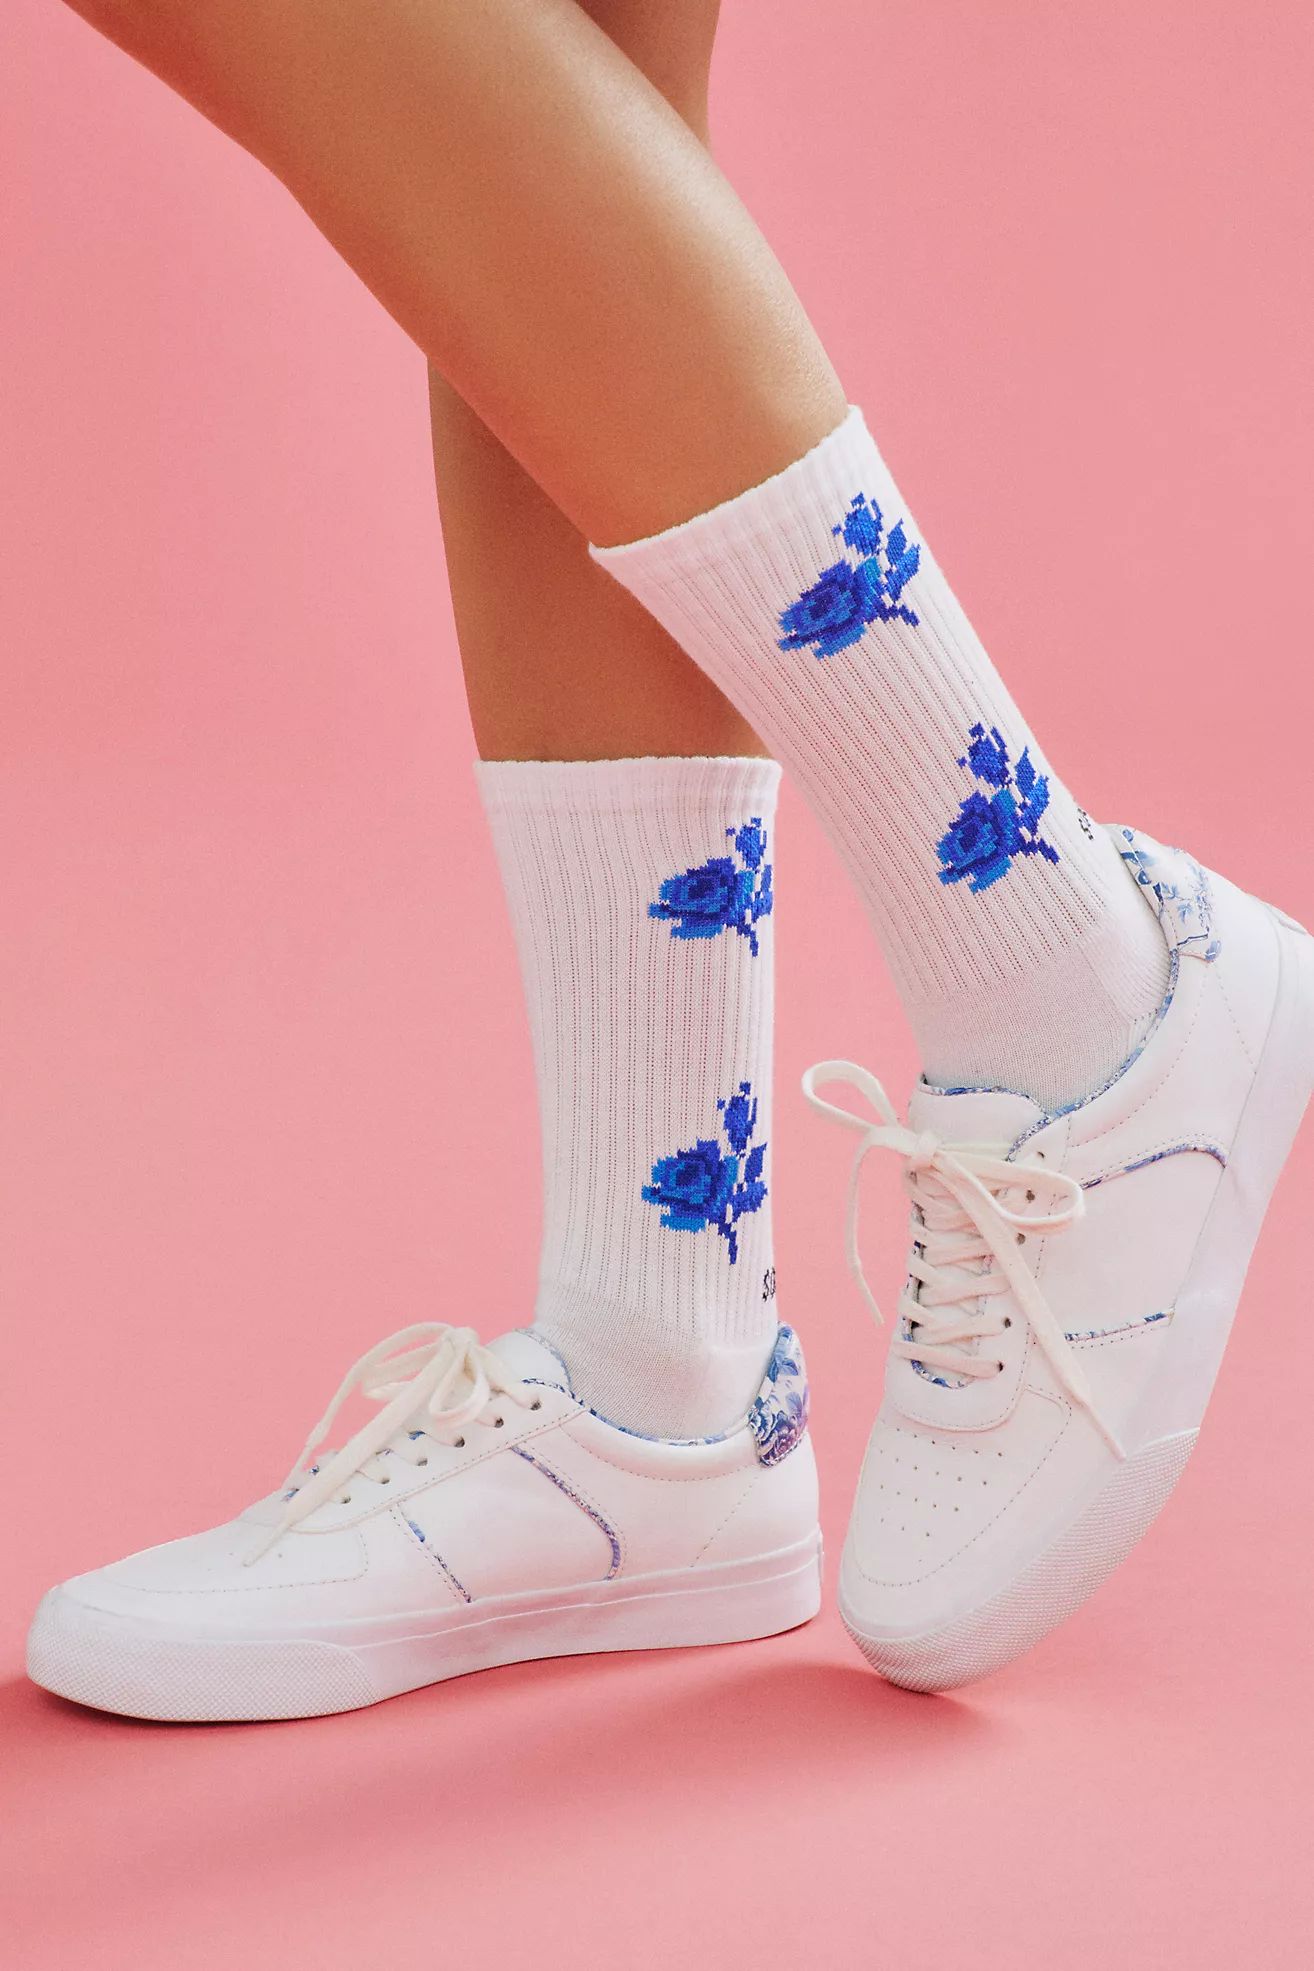 Reformation Harlow Leather Sneakers | Anthropologie (US)